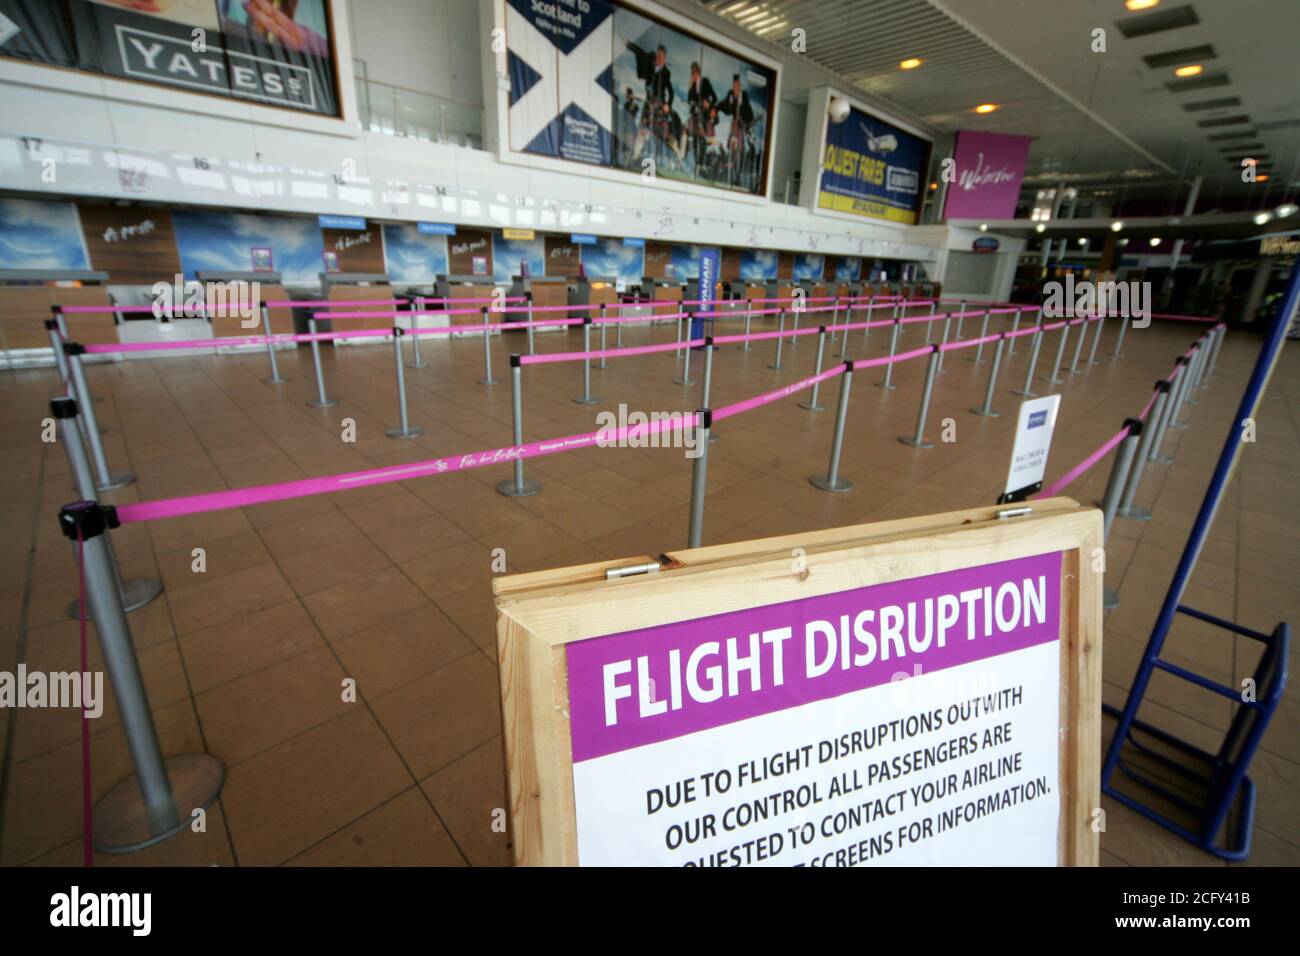 Glasgow Prestwick Airport, Ayrshire, Scotland. 16 April 2010, Terminal Building empty as a result of Icelandic Volcanic Ash closing UK airspace. Concorse empty with solitary figure on phone Stock Photo